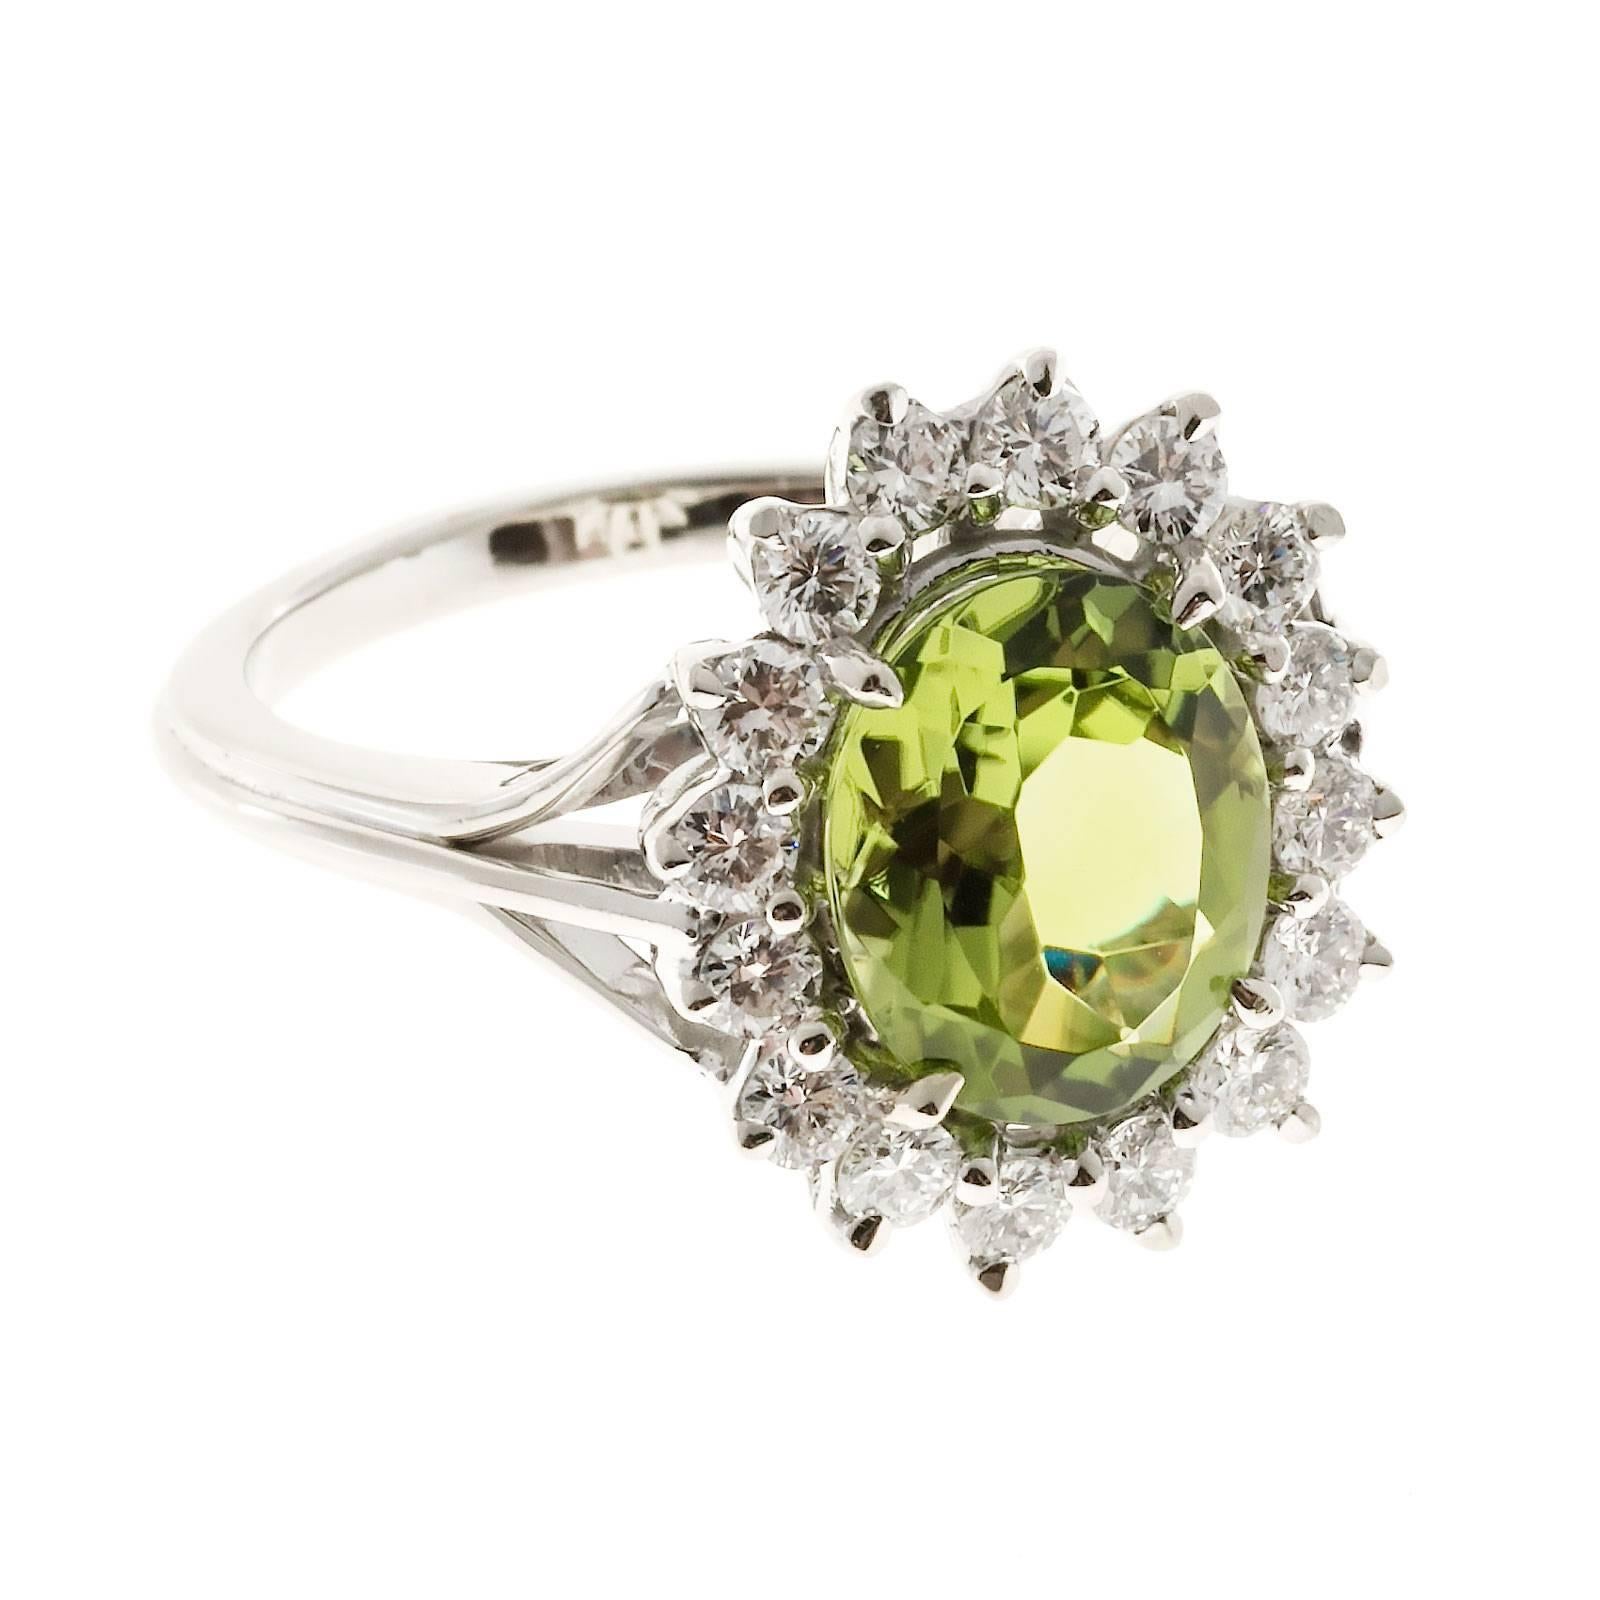 Bright extra sparkly genuine natural untreated Peridot ring from an estate surrounded by bright shiny full cut diamonds. Circa 1960 -1970.

1 oval bright medium green Peridot, approx. total weight 3.00cts, VS, 10.62 x 8.67 x 4.09mm
16 round